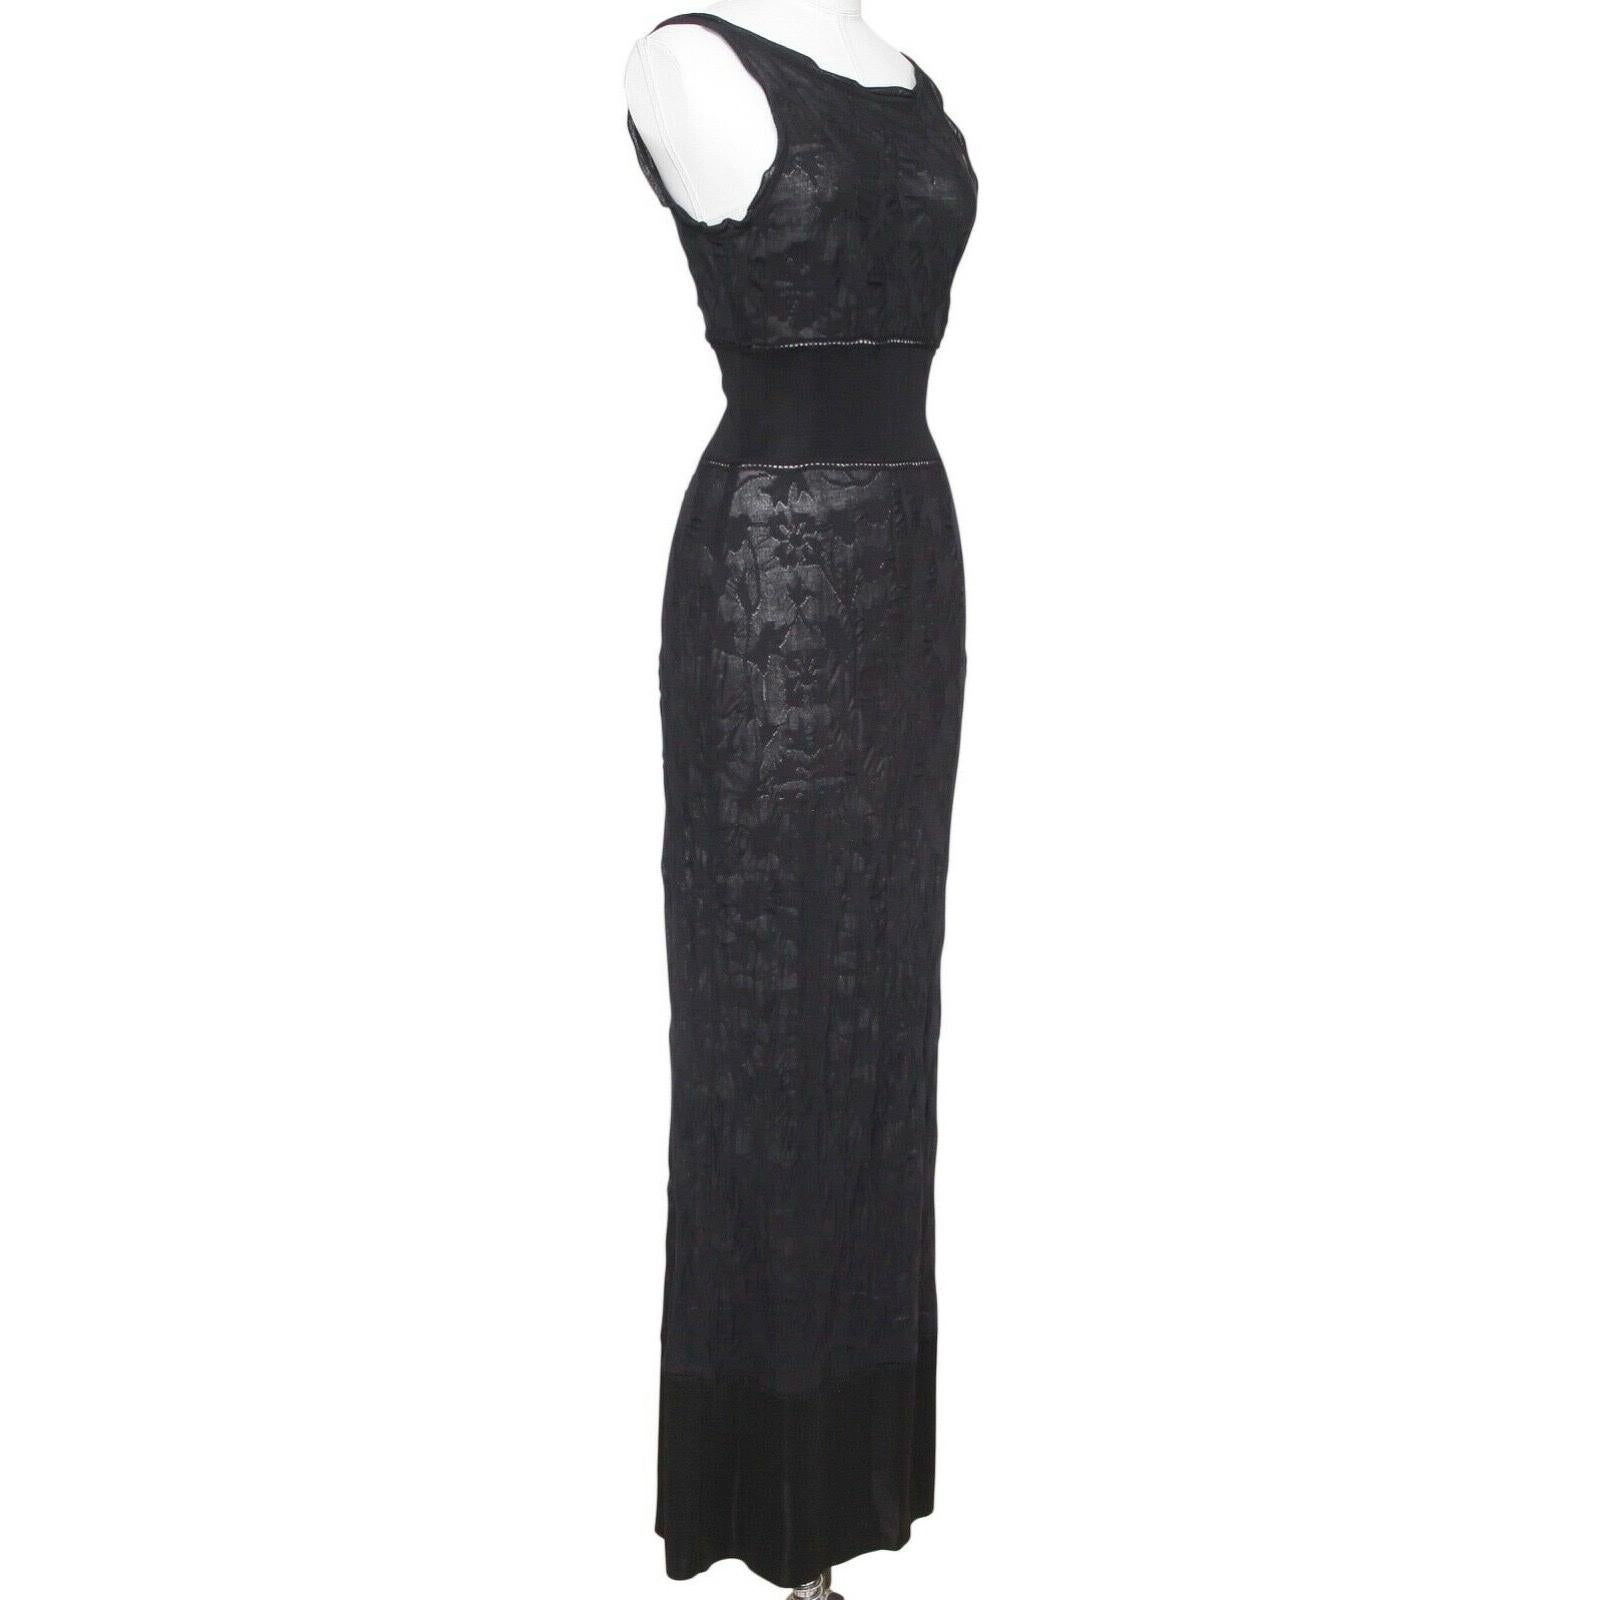 GUARANTEED AUTHENTIC CHANEL SPRING 2011 COLLECTION LONG SHEER BLACK KNIT SLEEVELESS DRESS

Retail excluding taxes $2.995

Details:
- Black sheer floral black knit long dress.
- Scoop neck.
- Elasticized at waist, partial side zipper